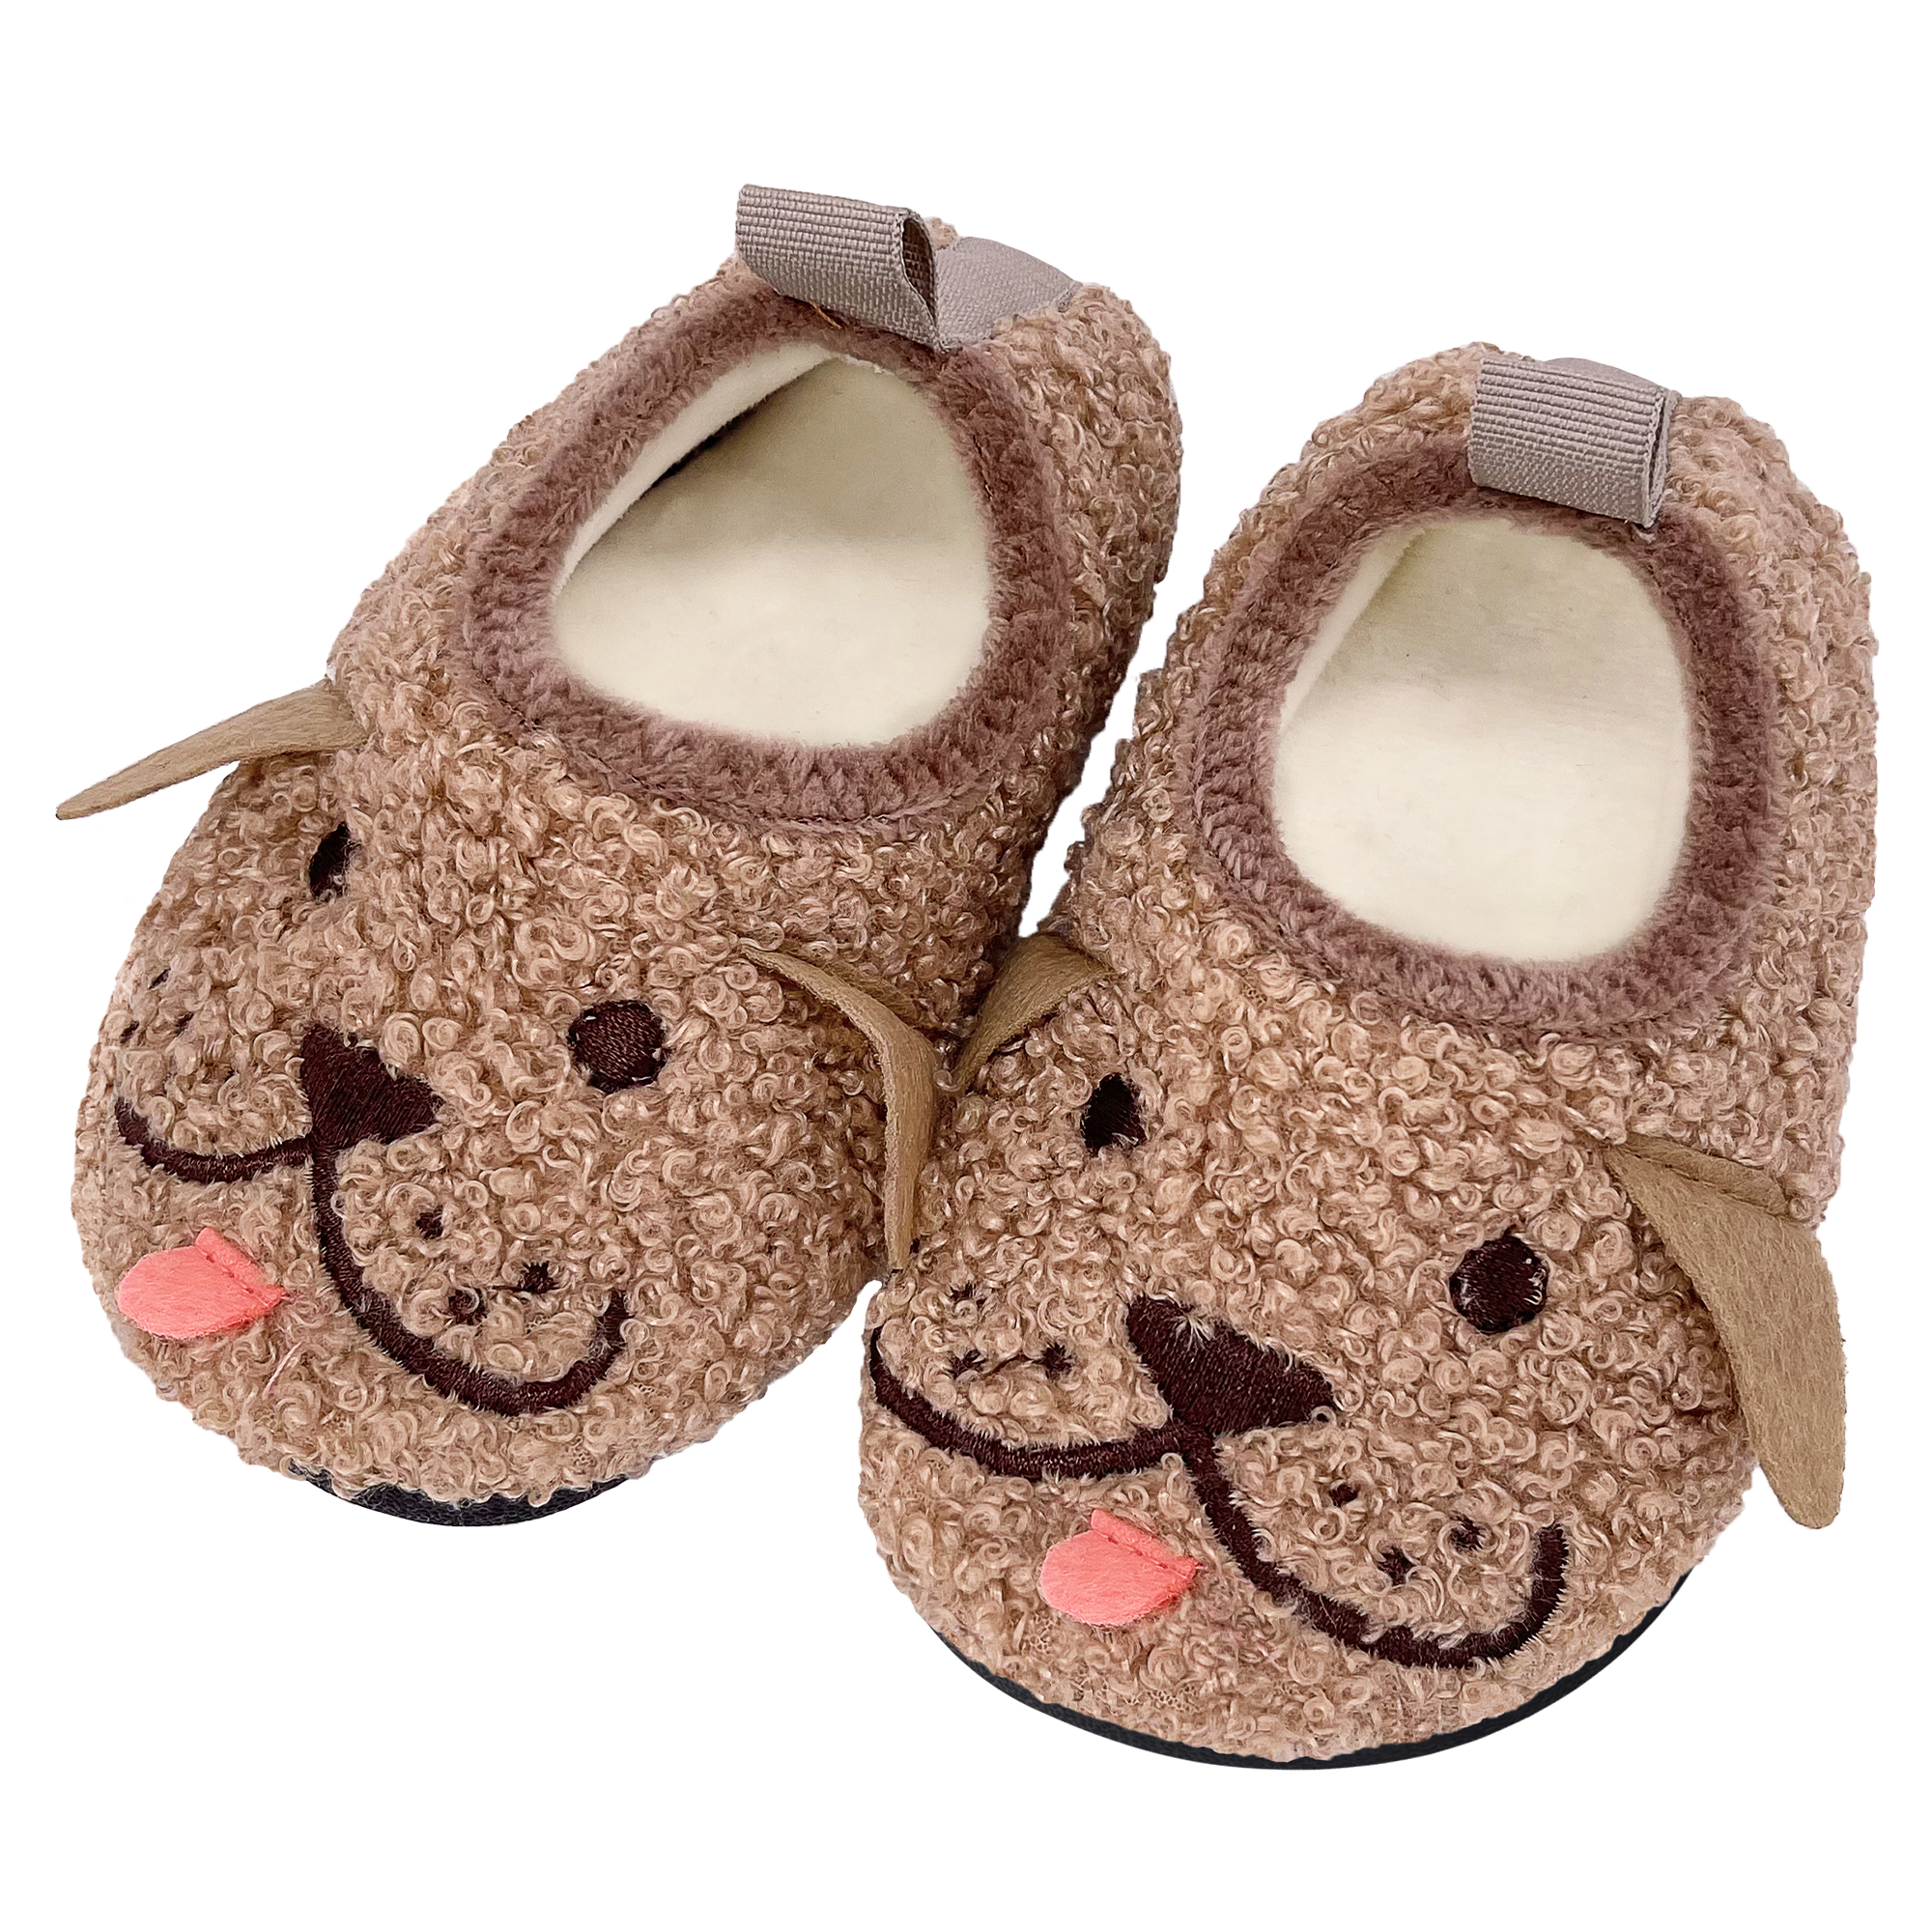 Kids Toddler Houes Slippers Indoor Home Shoes Warm Lightweight Socks for Boys Girls Baby with Non-Slip Rubber Sole